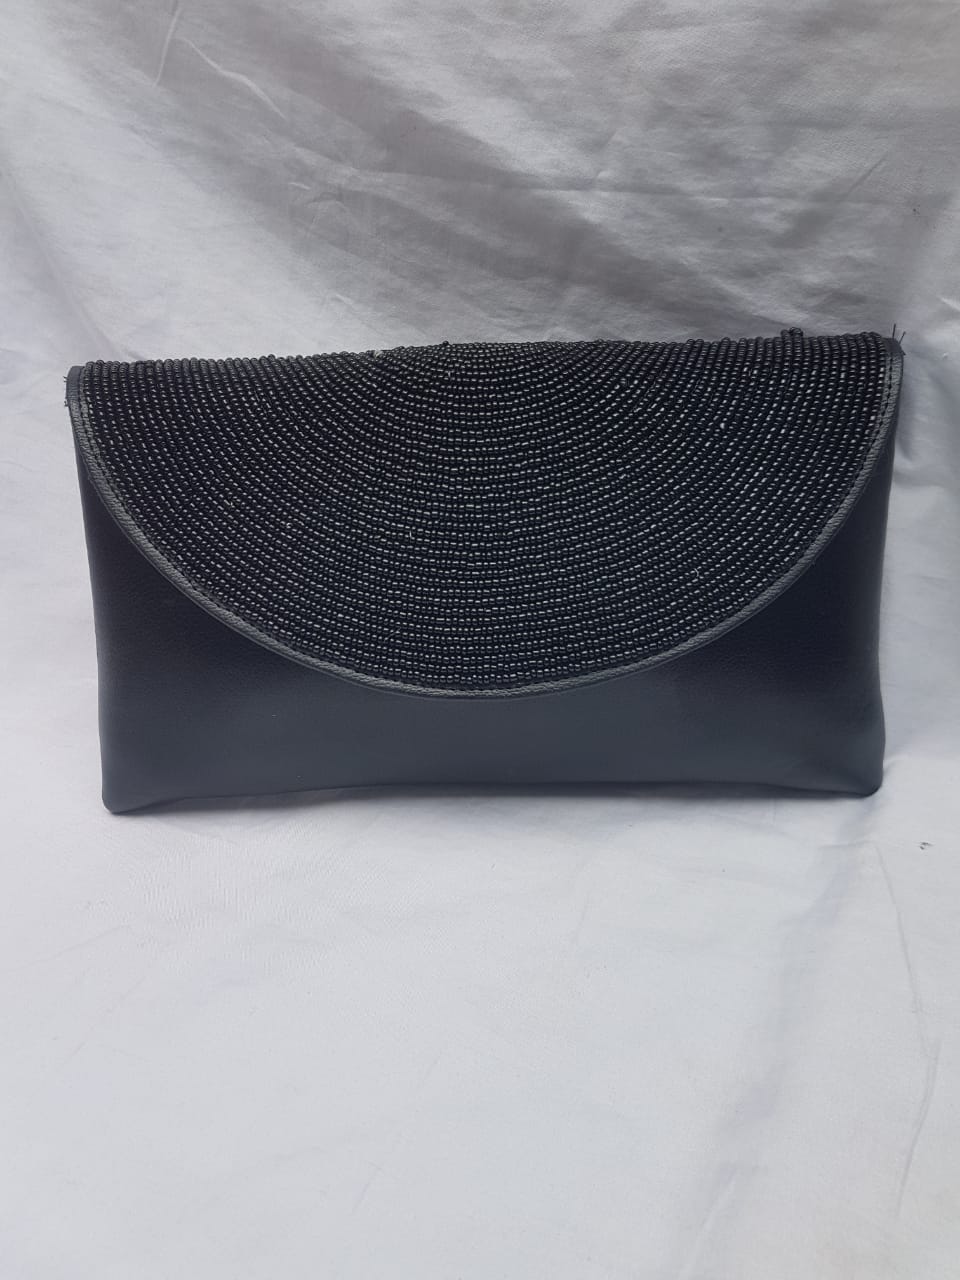 Black leather clutch purse decorated with black beads.